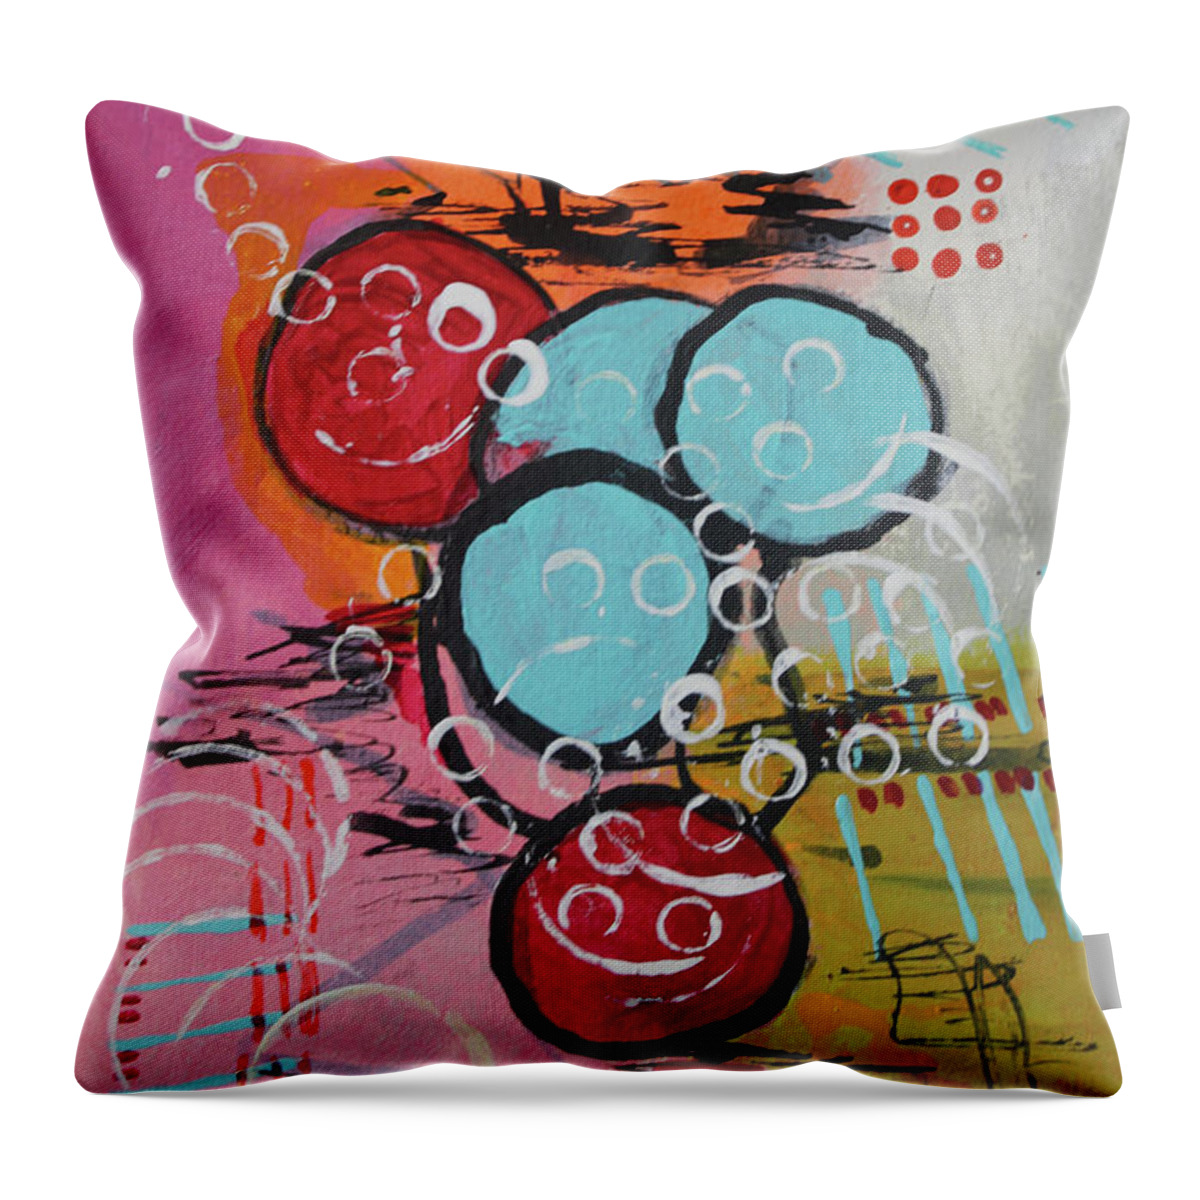 Orange Throw Pillow featuring the mixed media Friends by April Burton